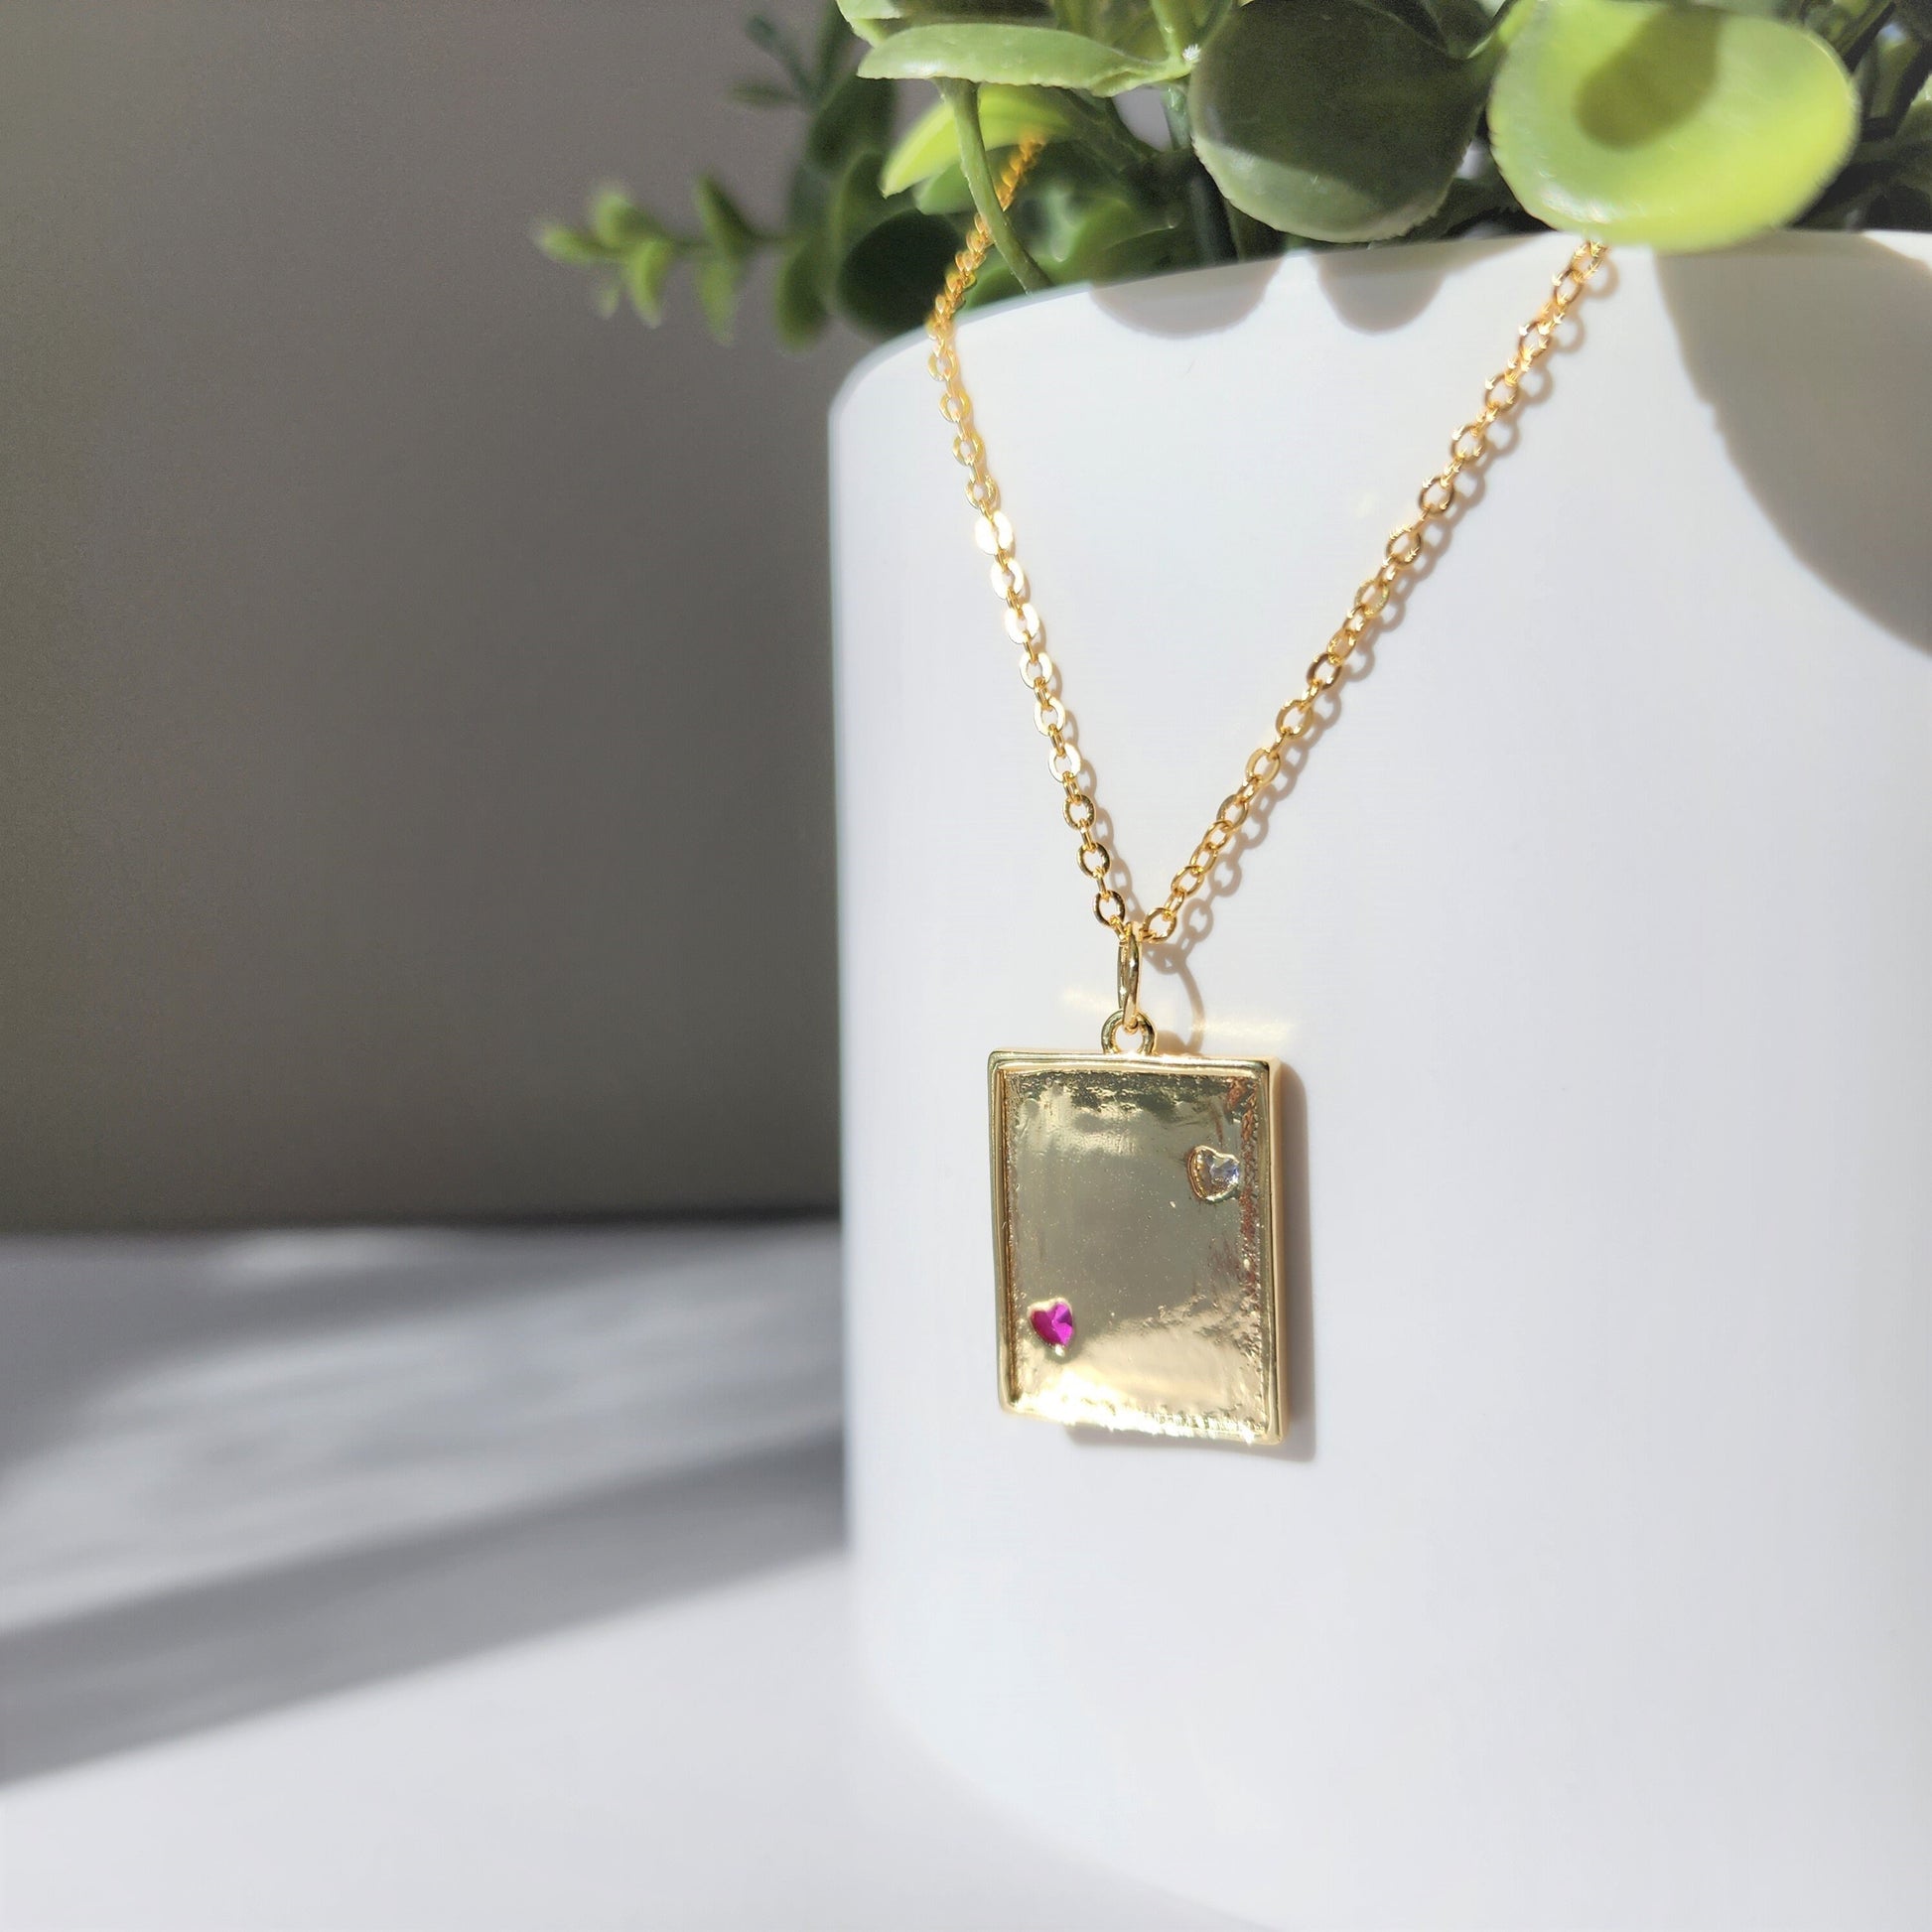 Love Mom necklace, gold plated pendant necklace, gift for her